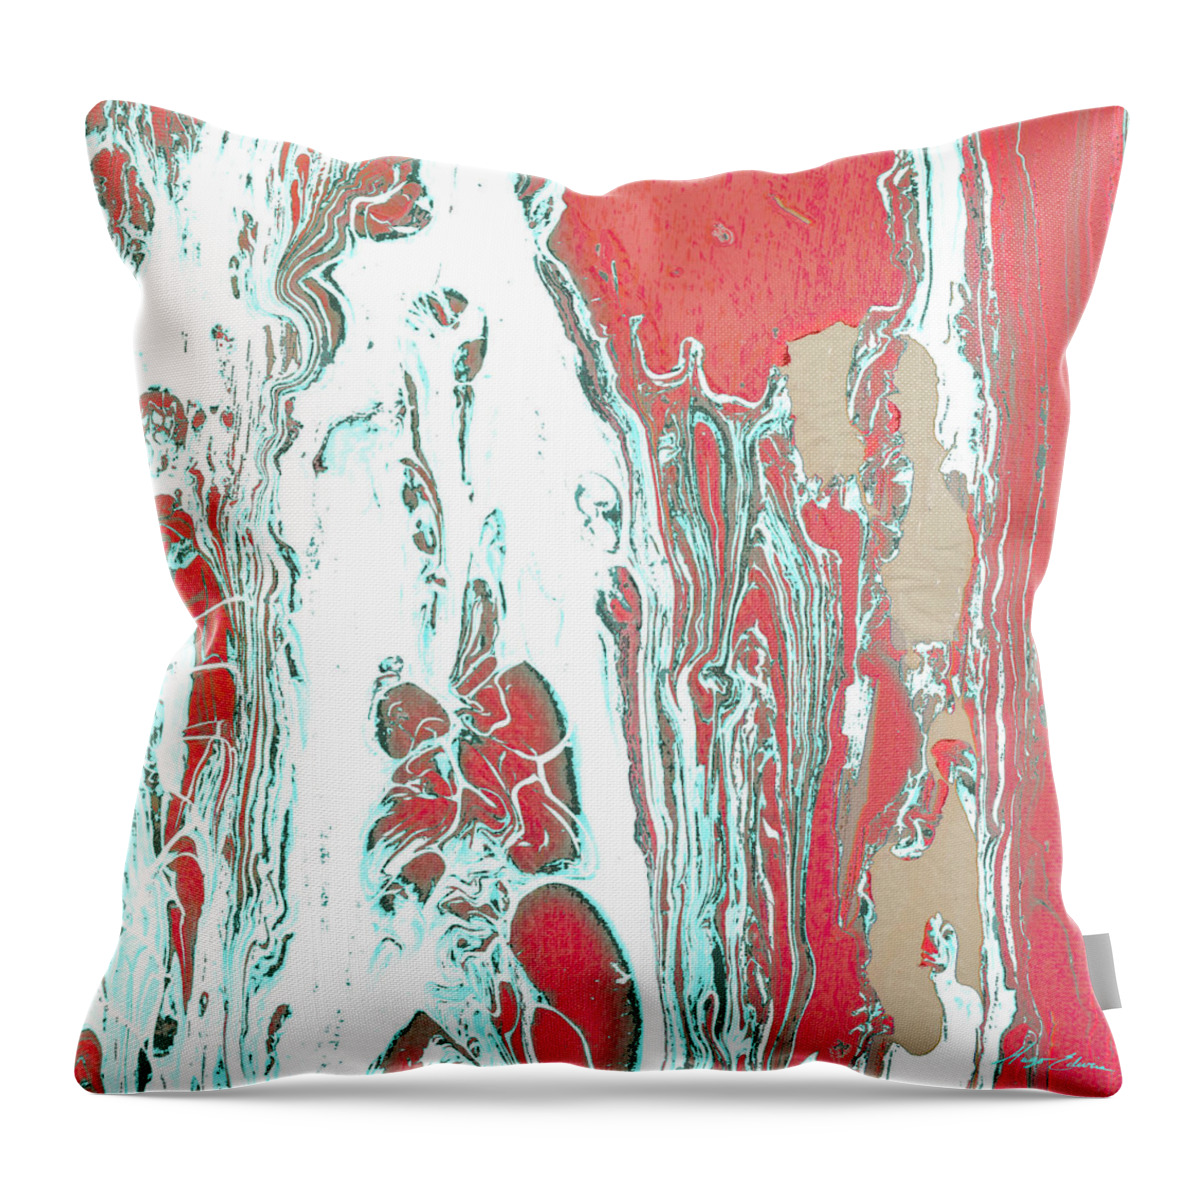 Elemental Throw Pillow featuring the mixed media Elemental Flow #1 by Hugo Edwins